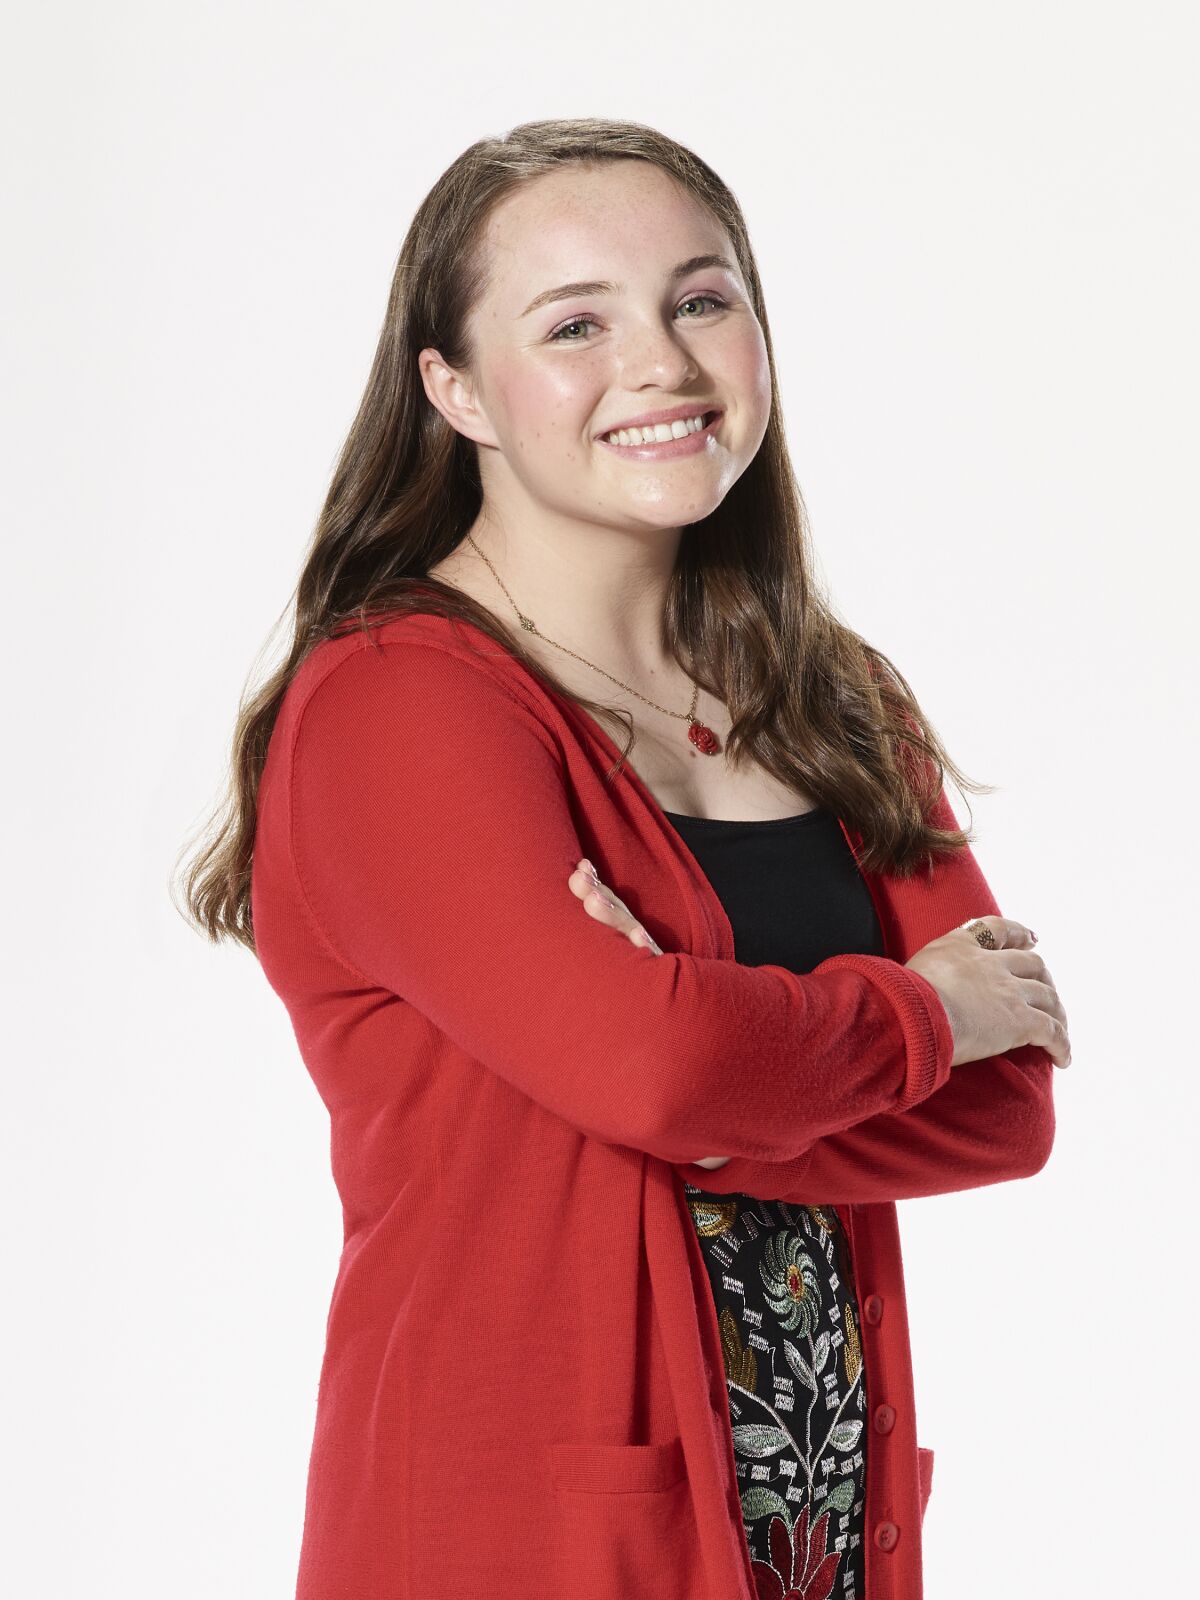 Kat Hammock, an Encinitas resident and recent high school graduate, is on Team Blake in this season of "The Voice."